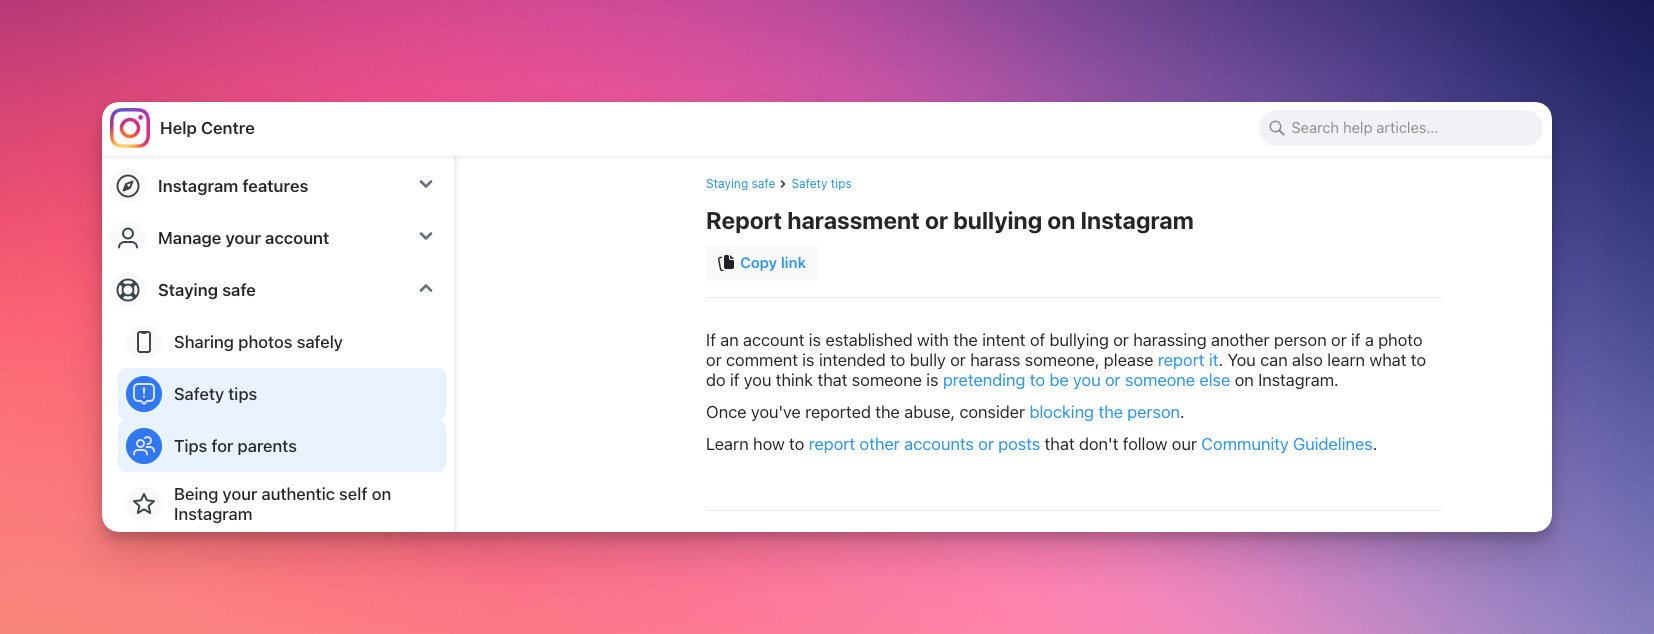 Remote.tools shows a screenshot from Instagram help center about reporting harassment or bullying on Instagram